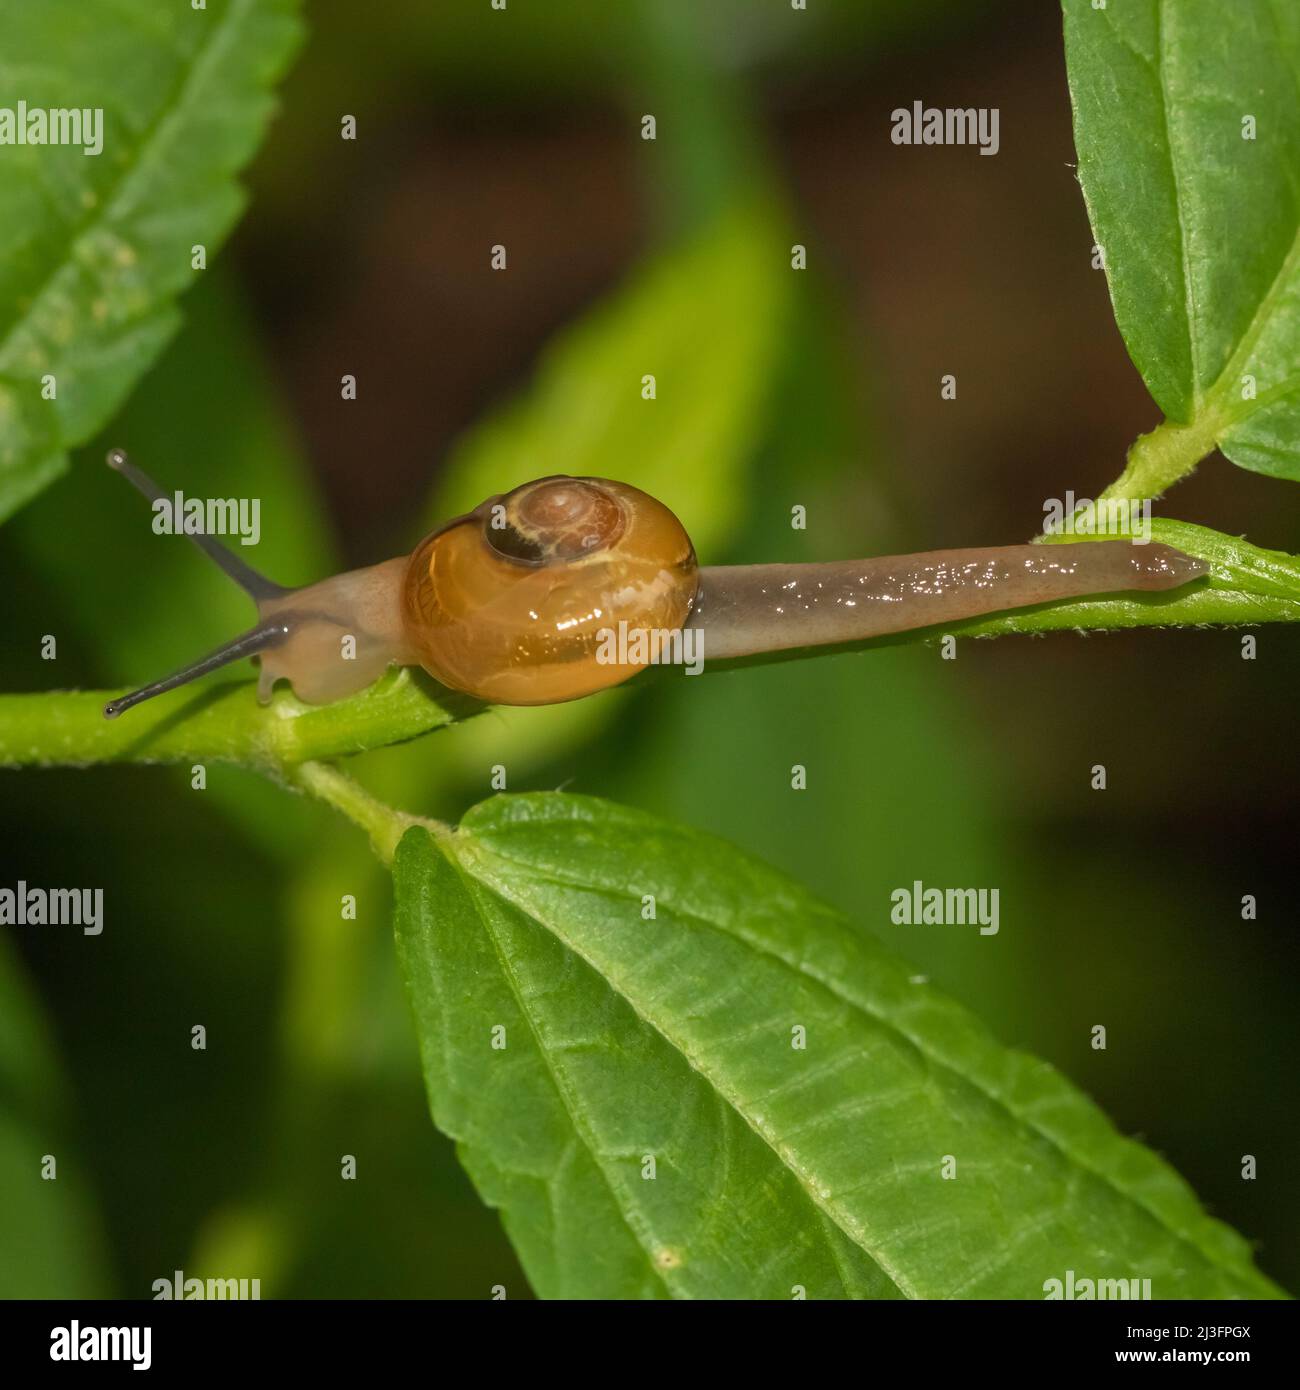 Close up macro image of a snail moving on a green leaf Stock Photo